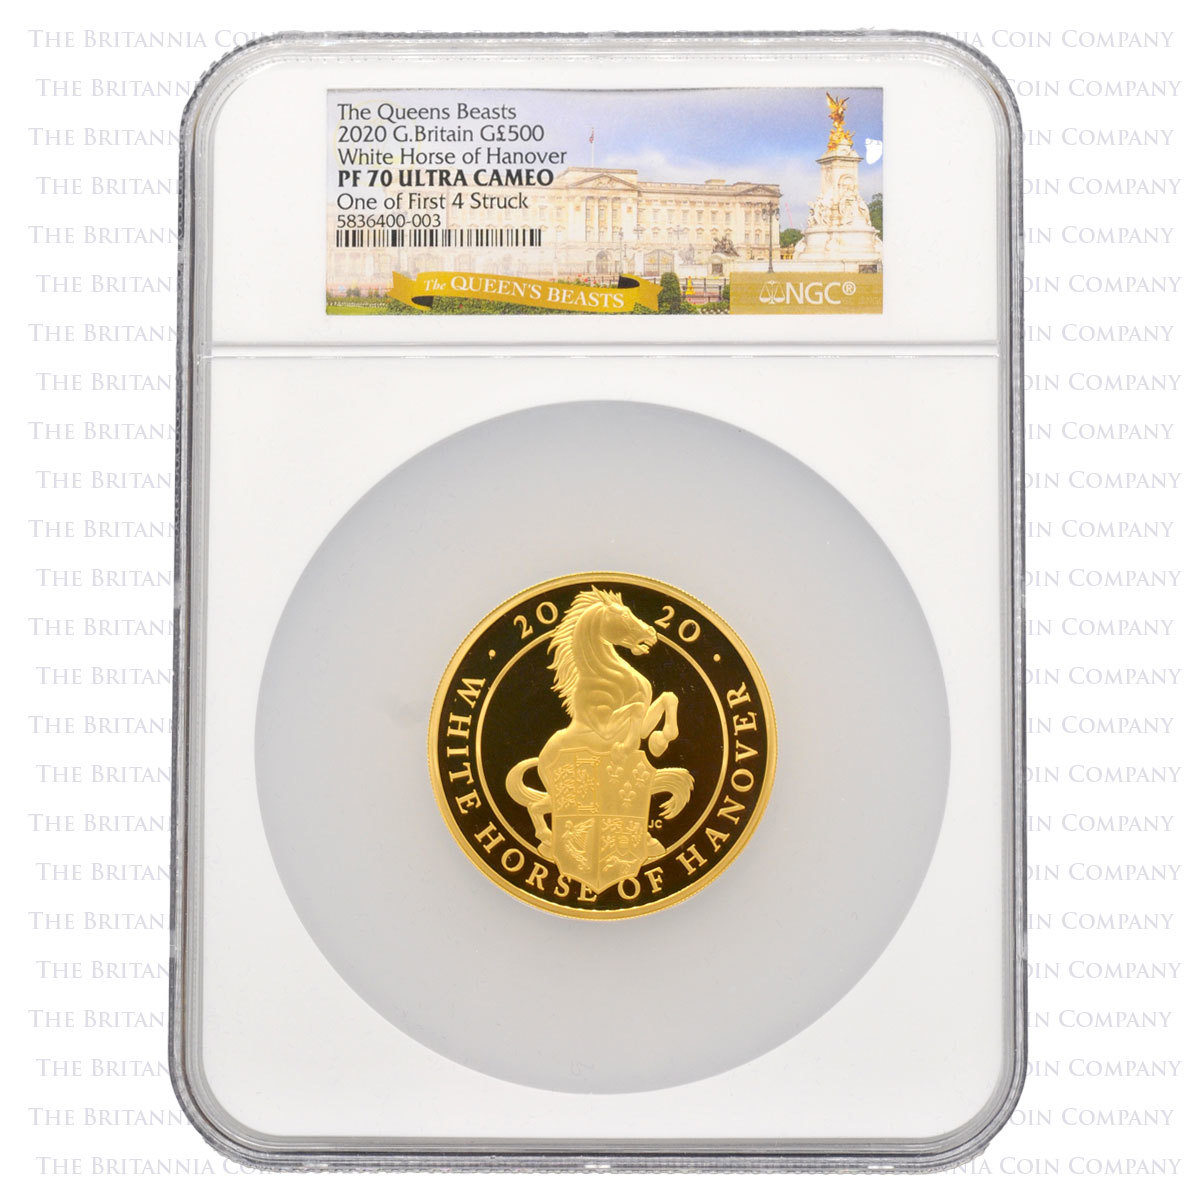 White Horse of Hanover 2020 5oz Gold Proof Coin